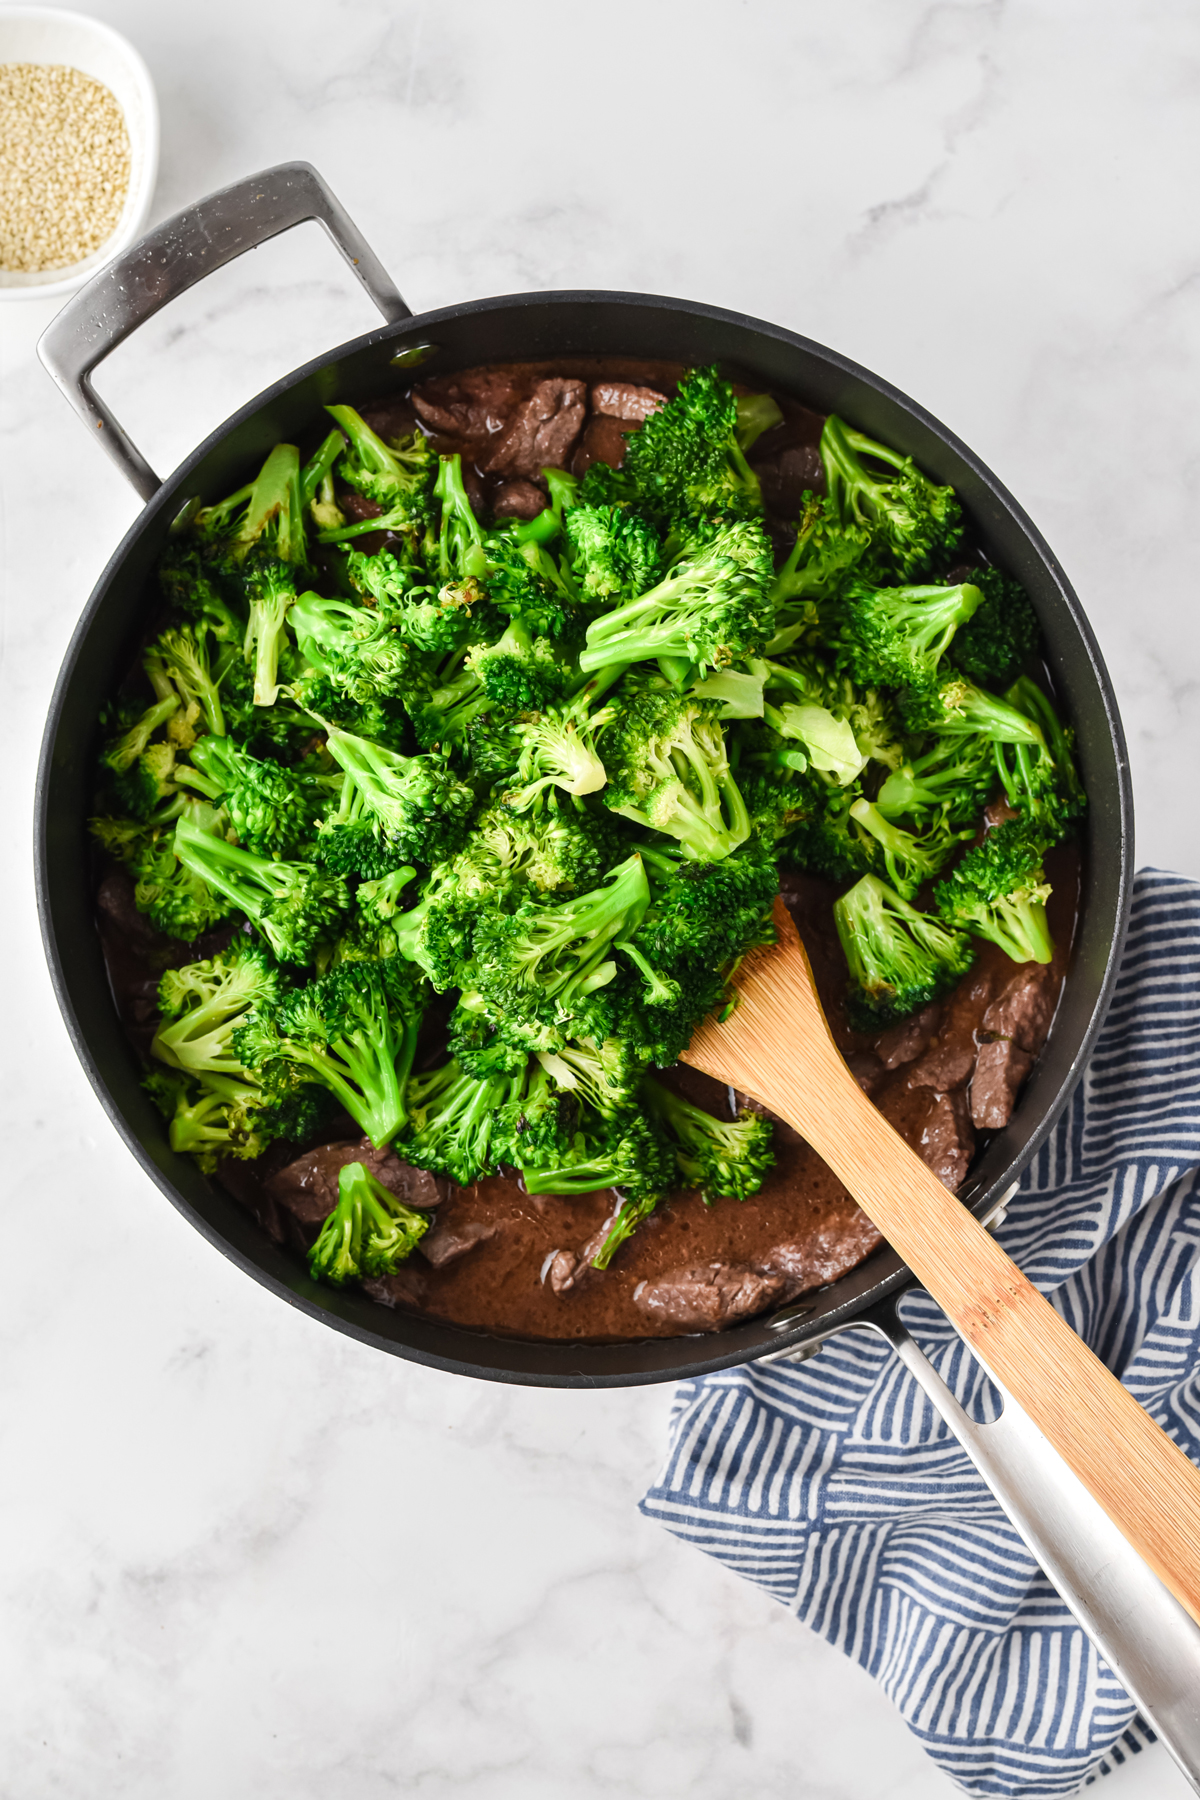 Mixing brocolli with meat